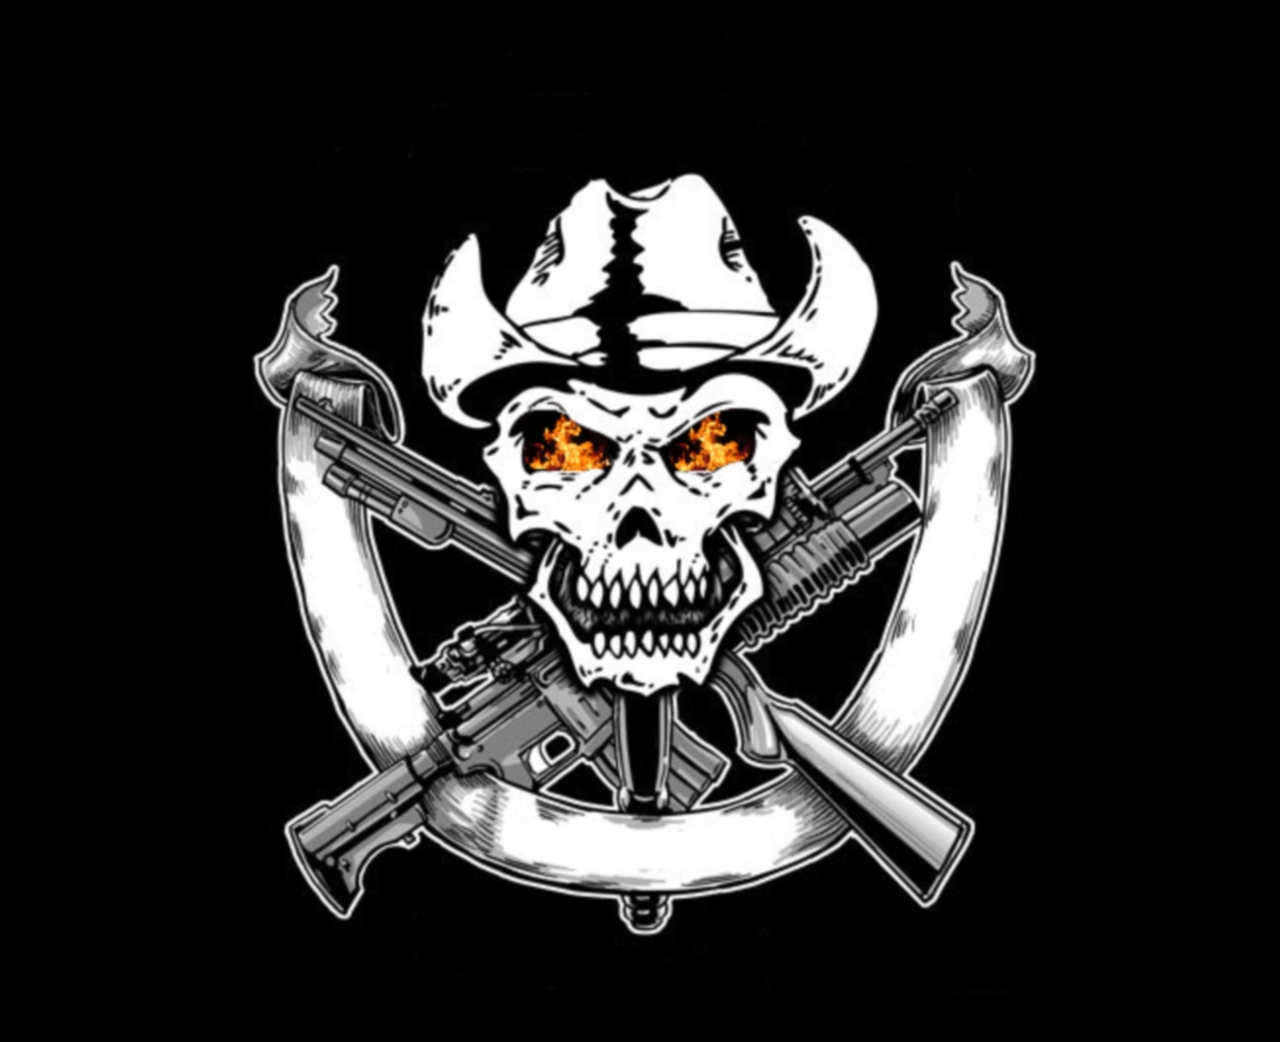 Cool Skull And Guns Wallpaper Image Pictures Becuo